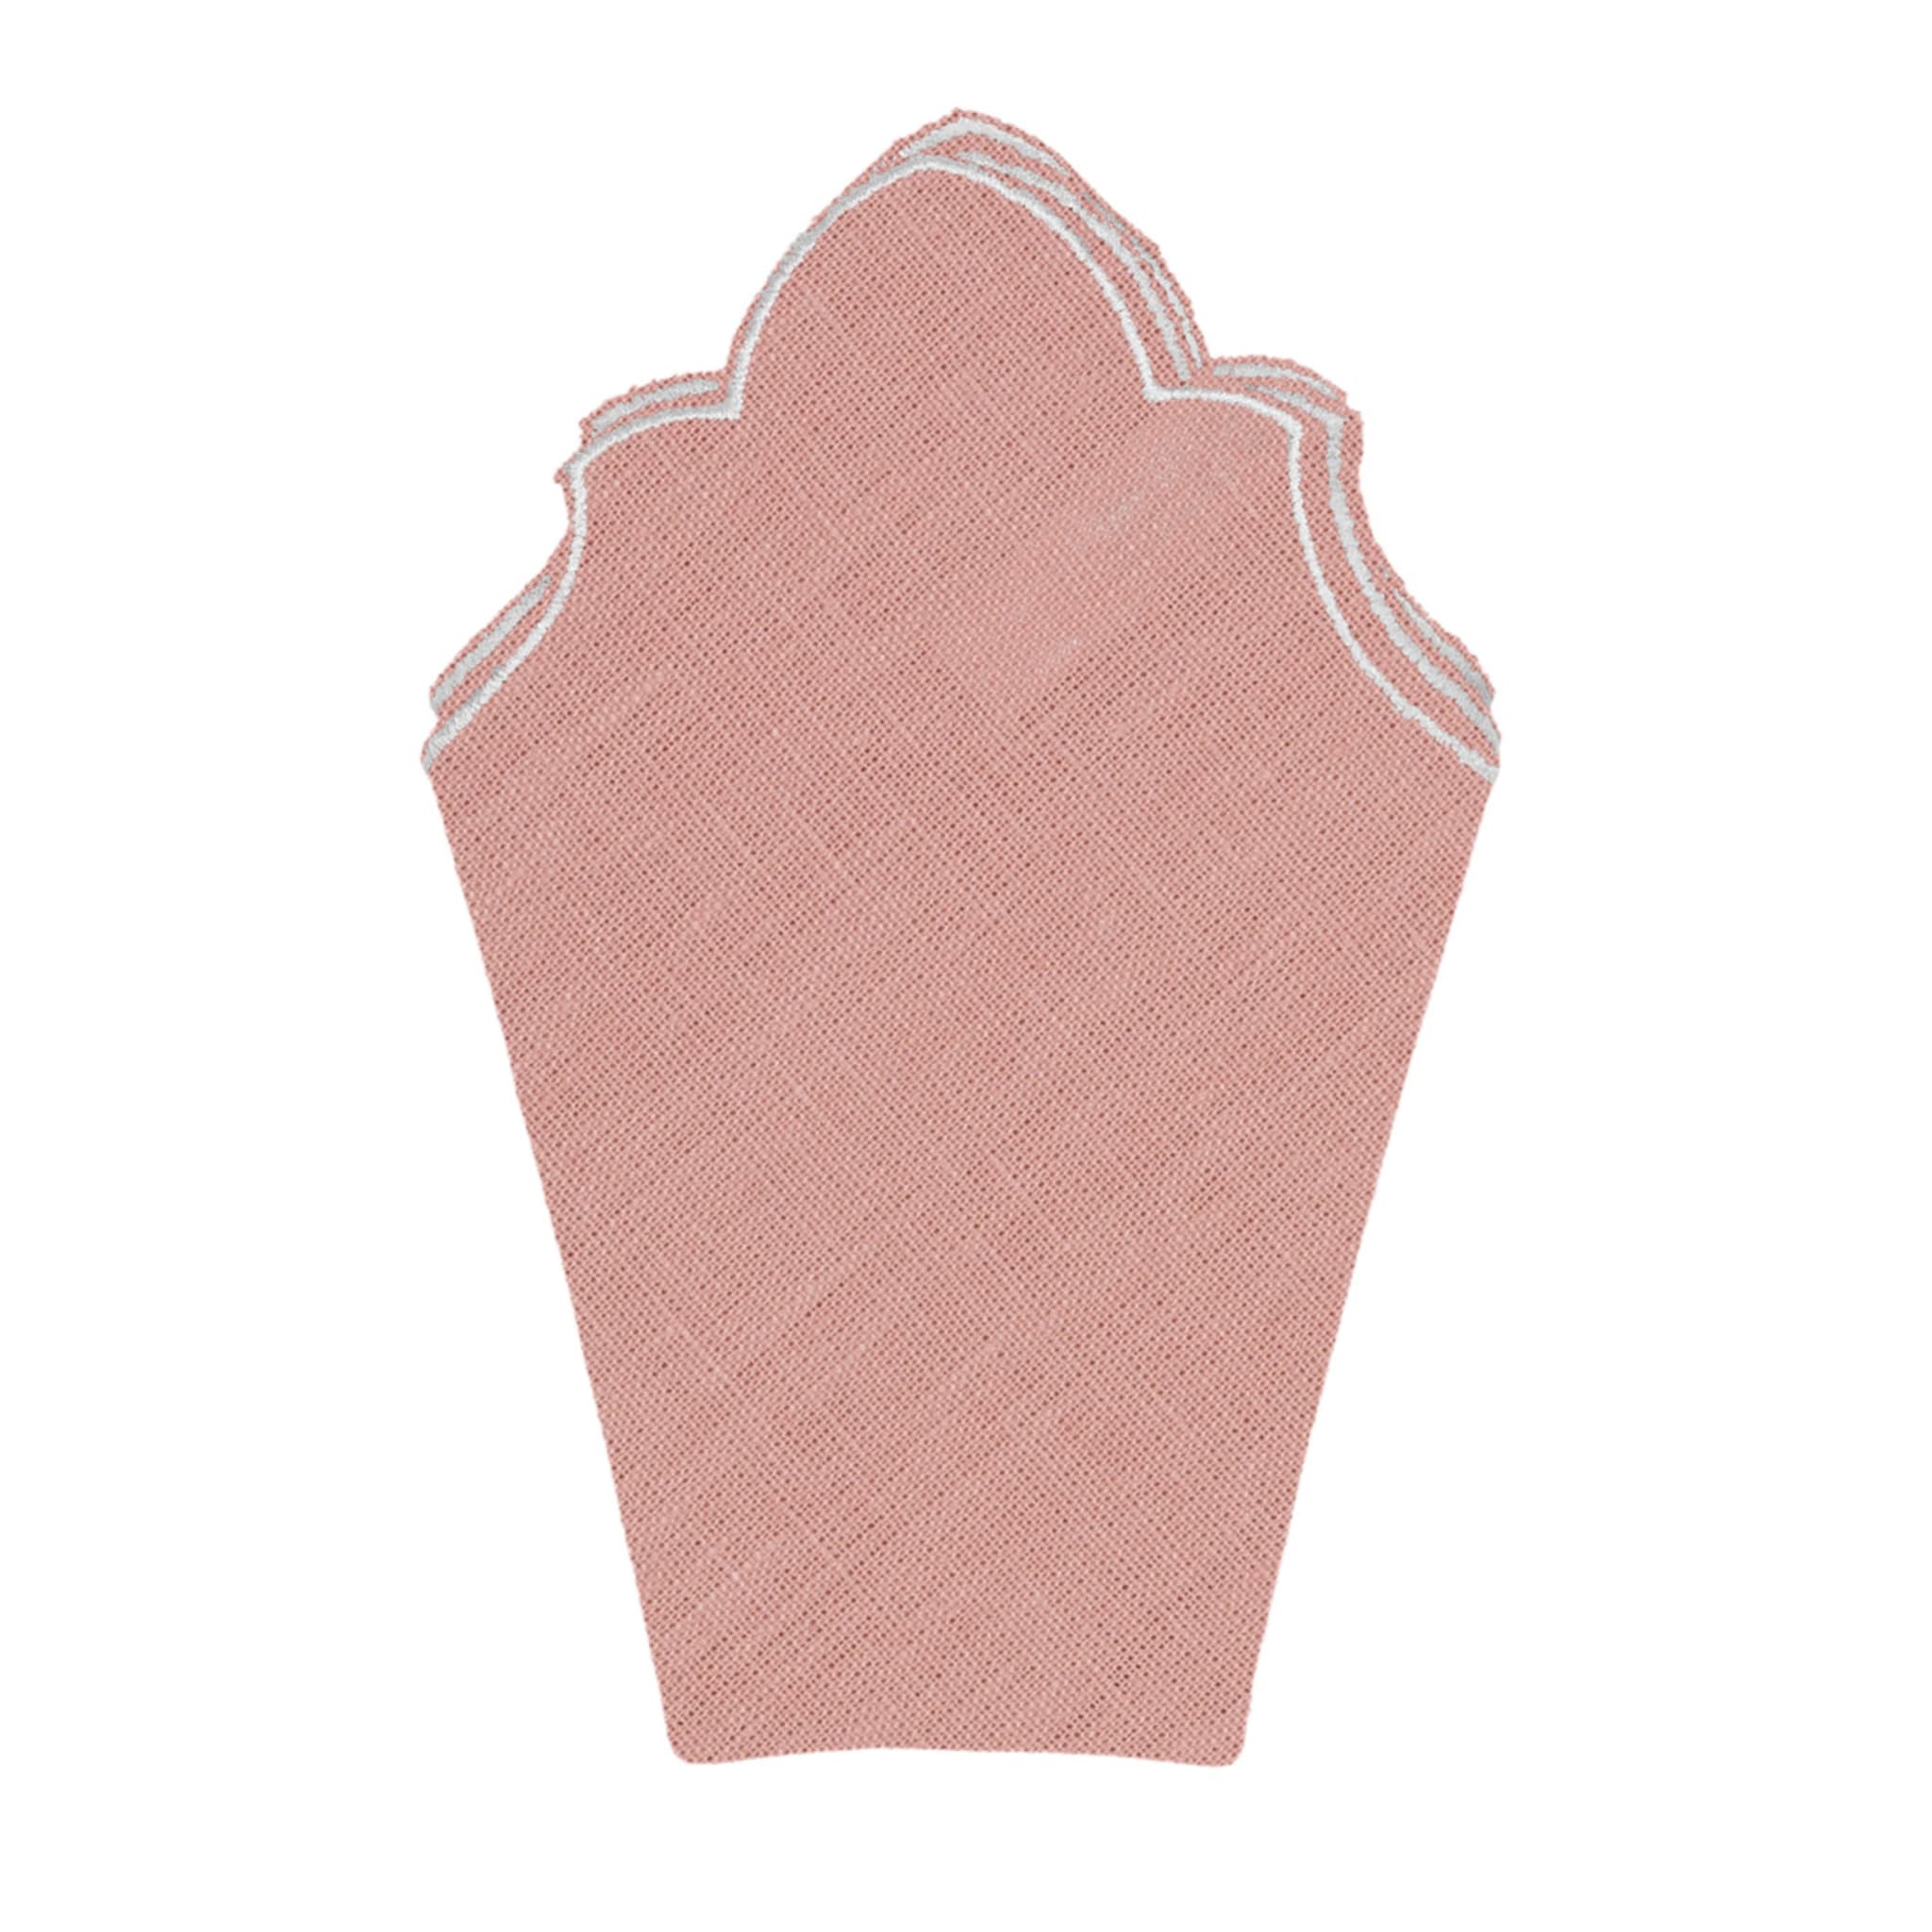 Set of 1 placemat and 1 Napkin - Victoria Smooth - Alternative view 3